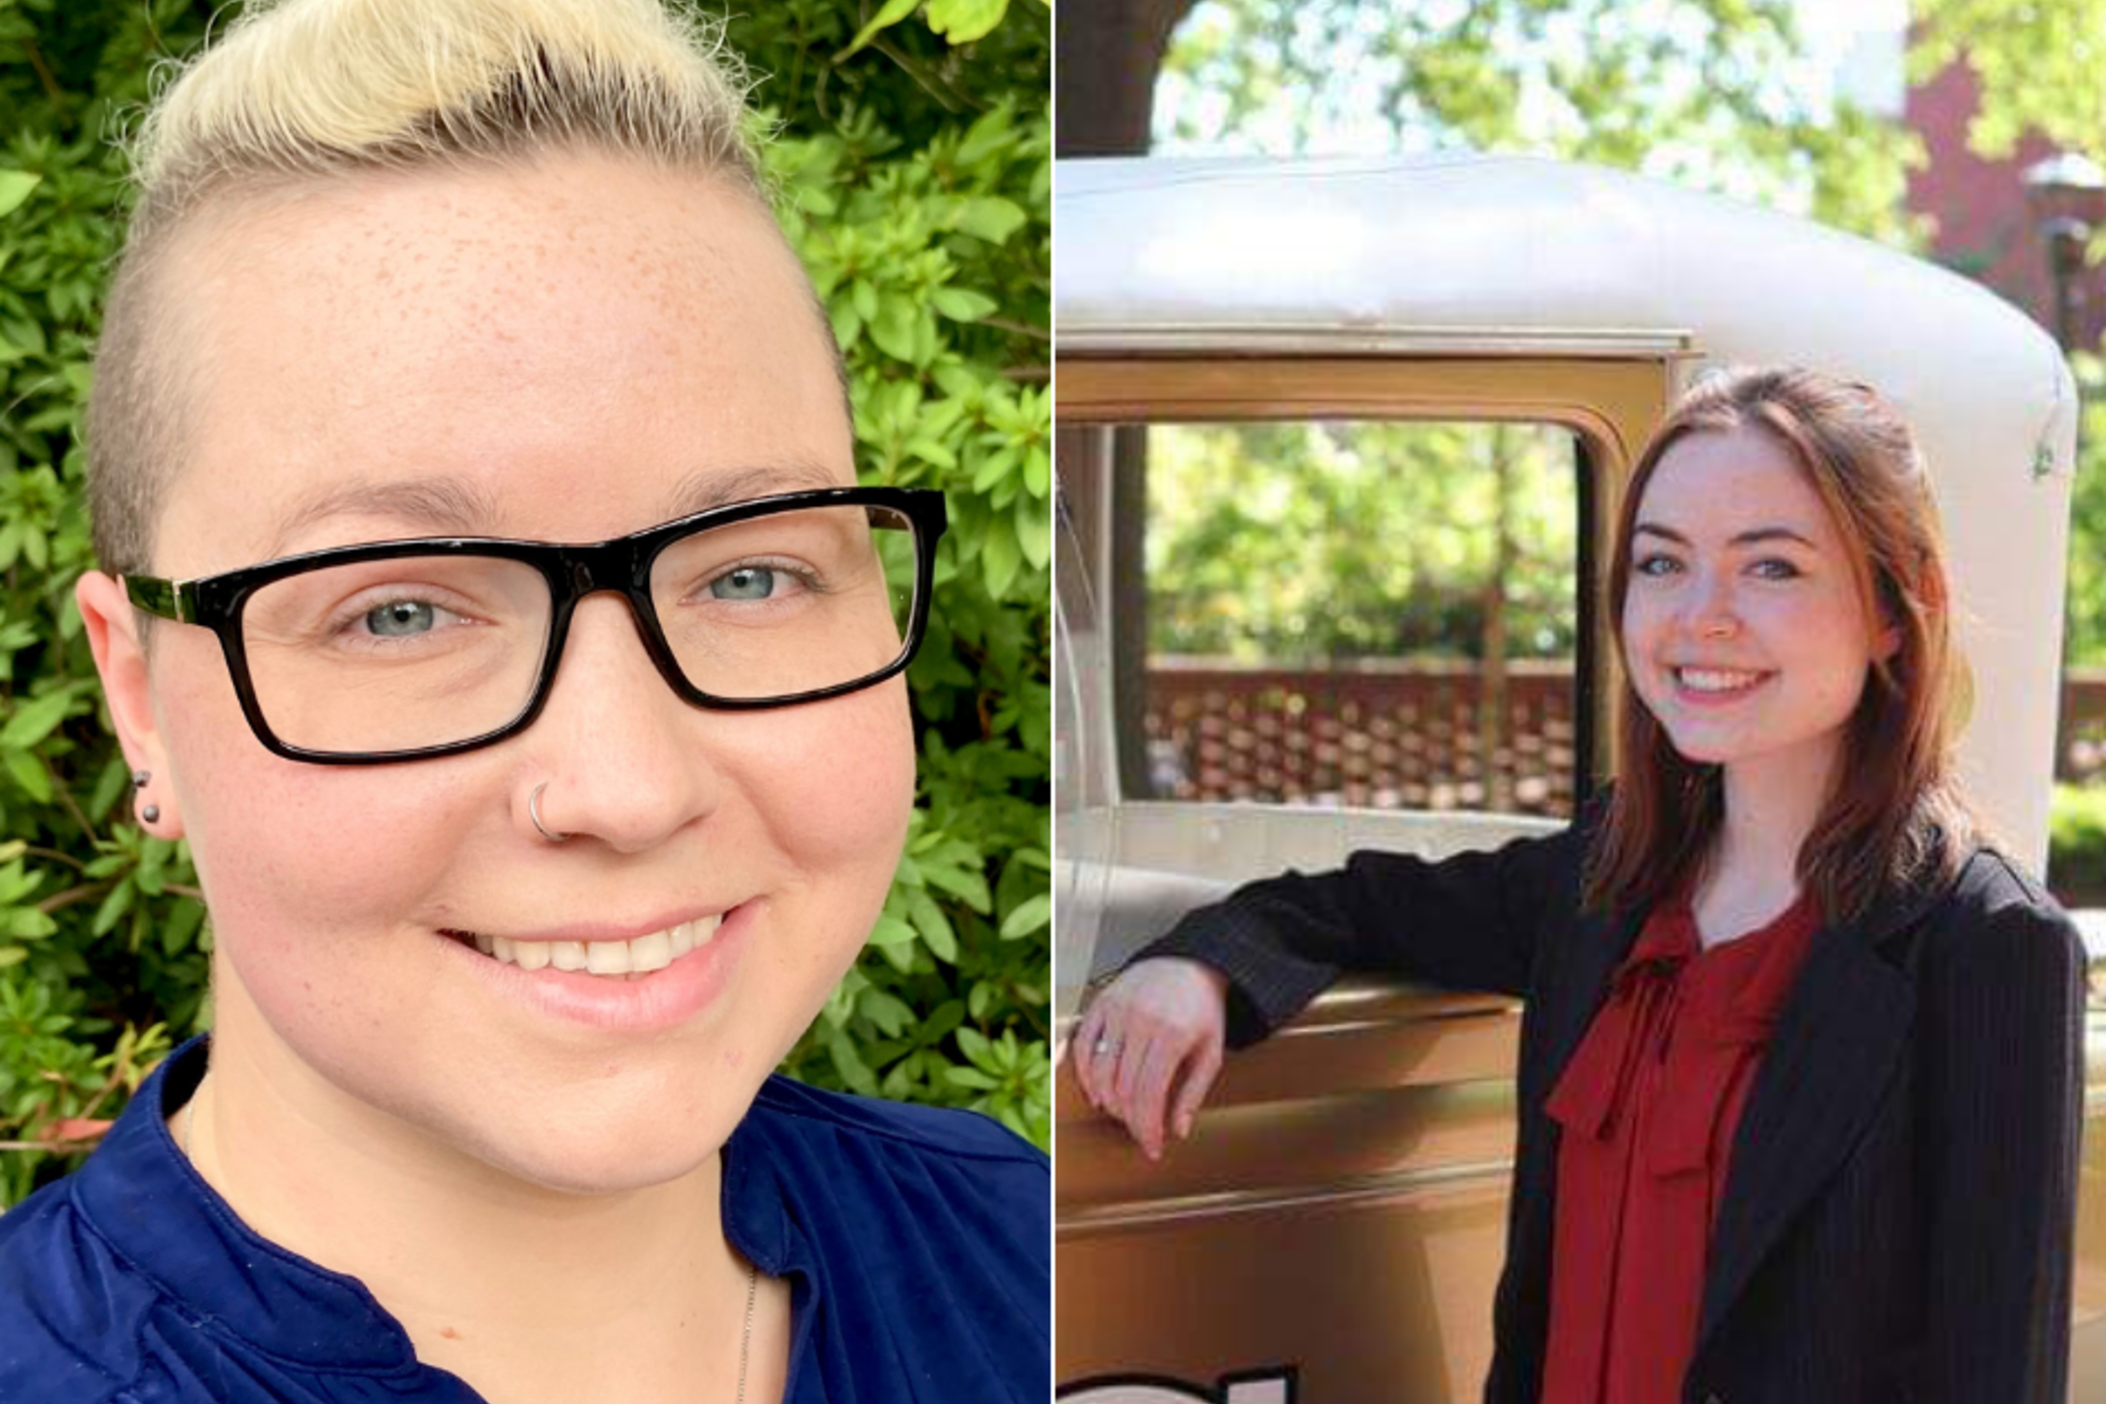 Georgia Tech students Michelle Babcock (left) and Rachel Mohr (right) recently won a contest with their work in fighting climate change.